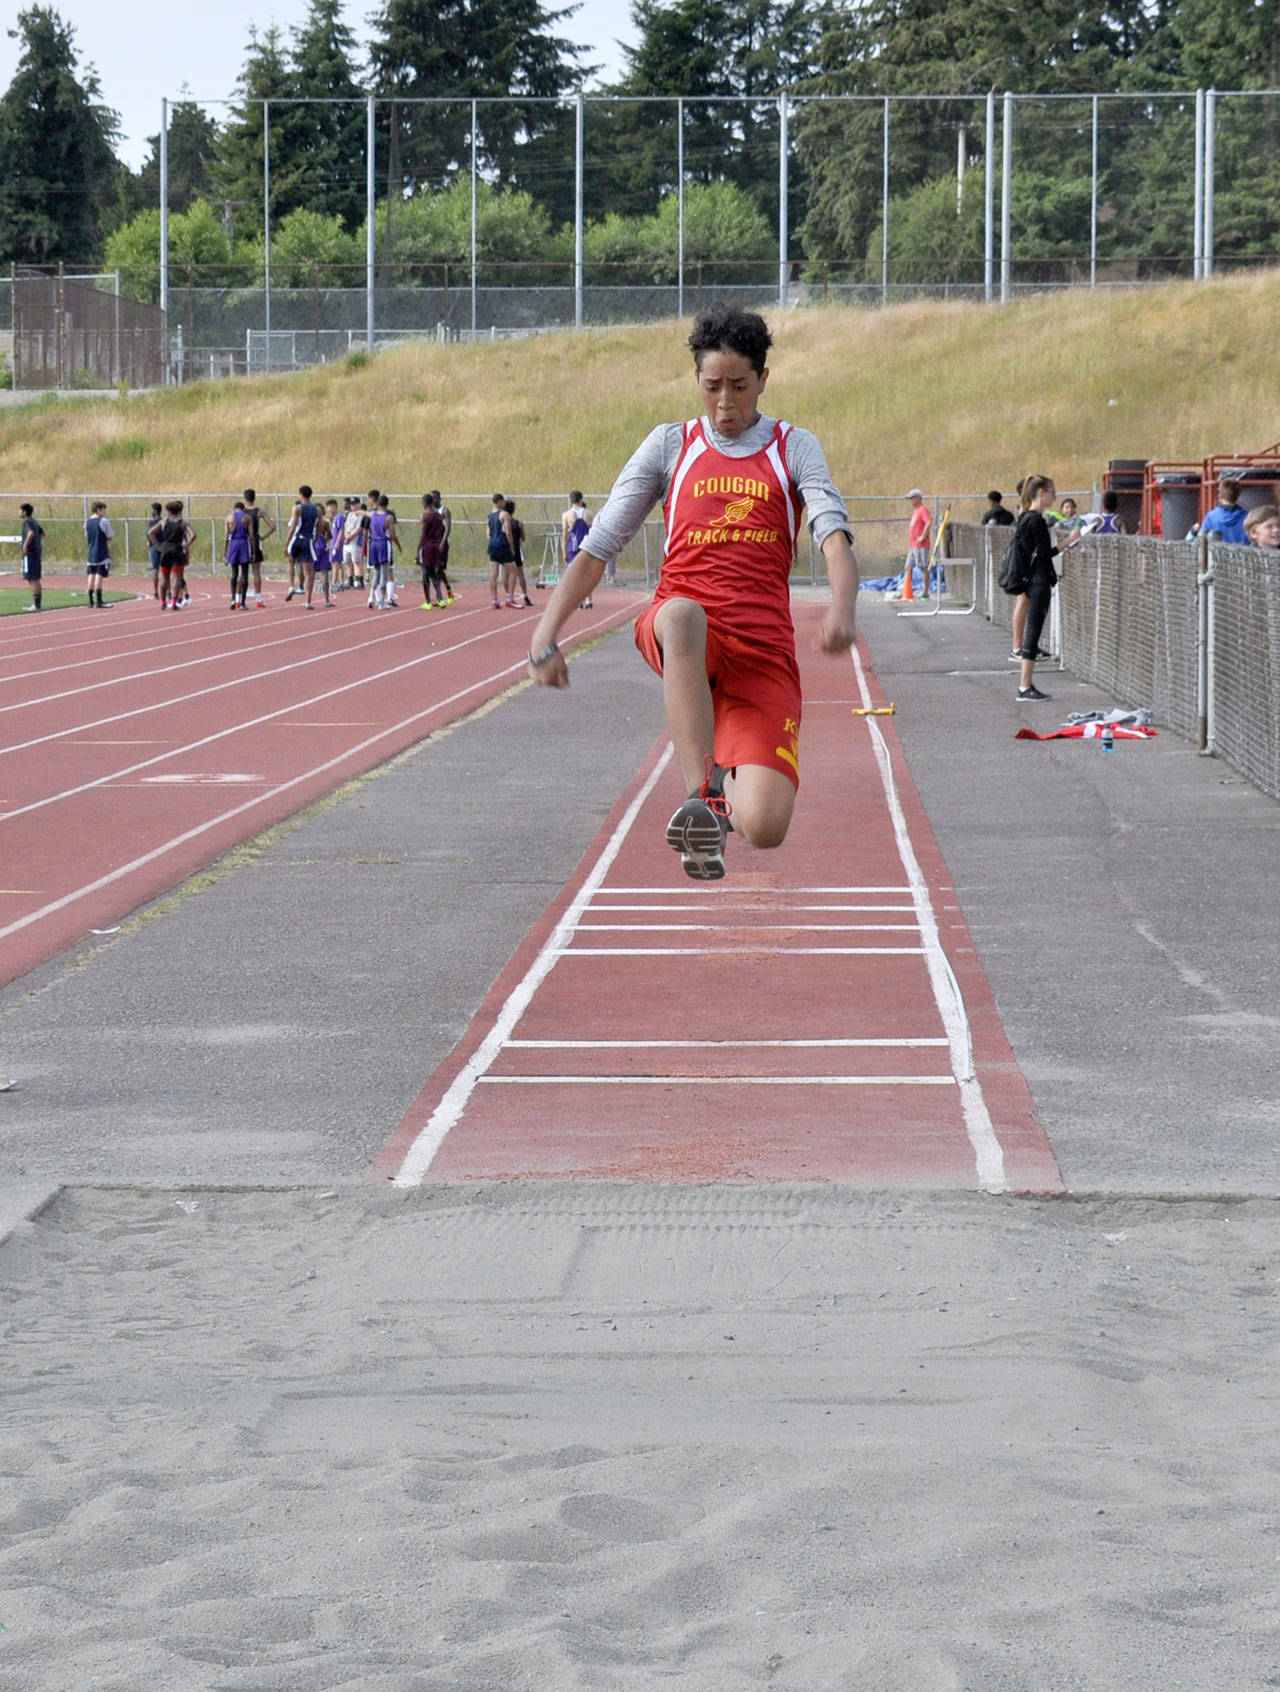 Federal Way middle-schoolers compete in district track and field meet